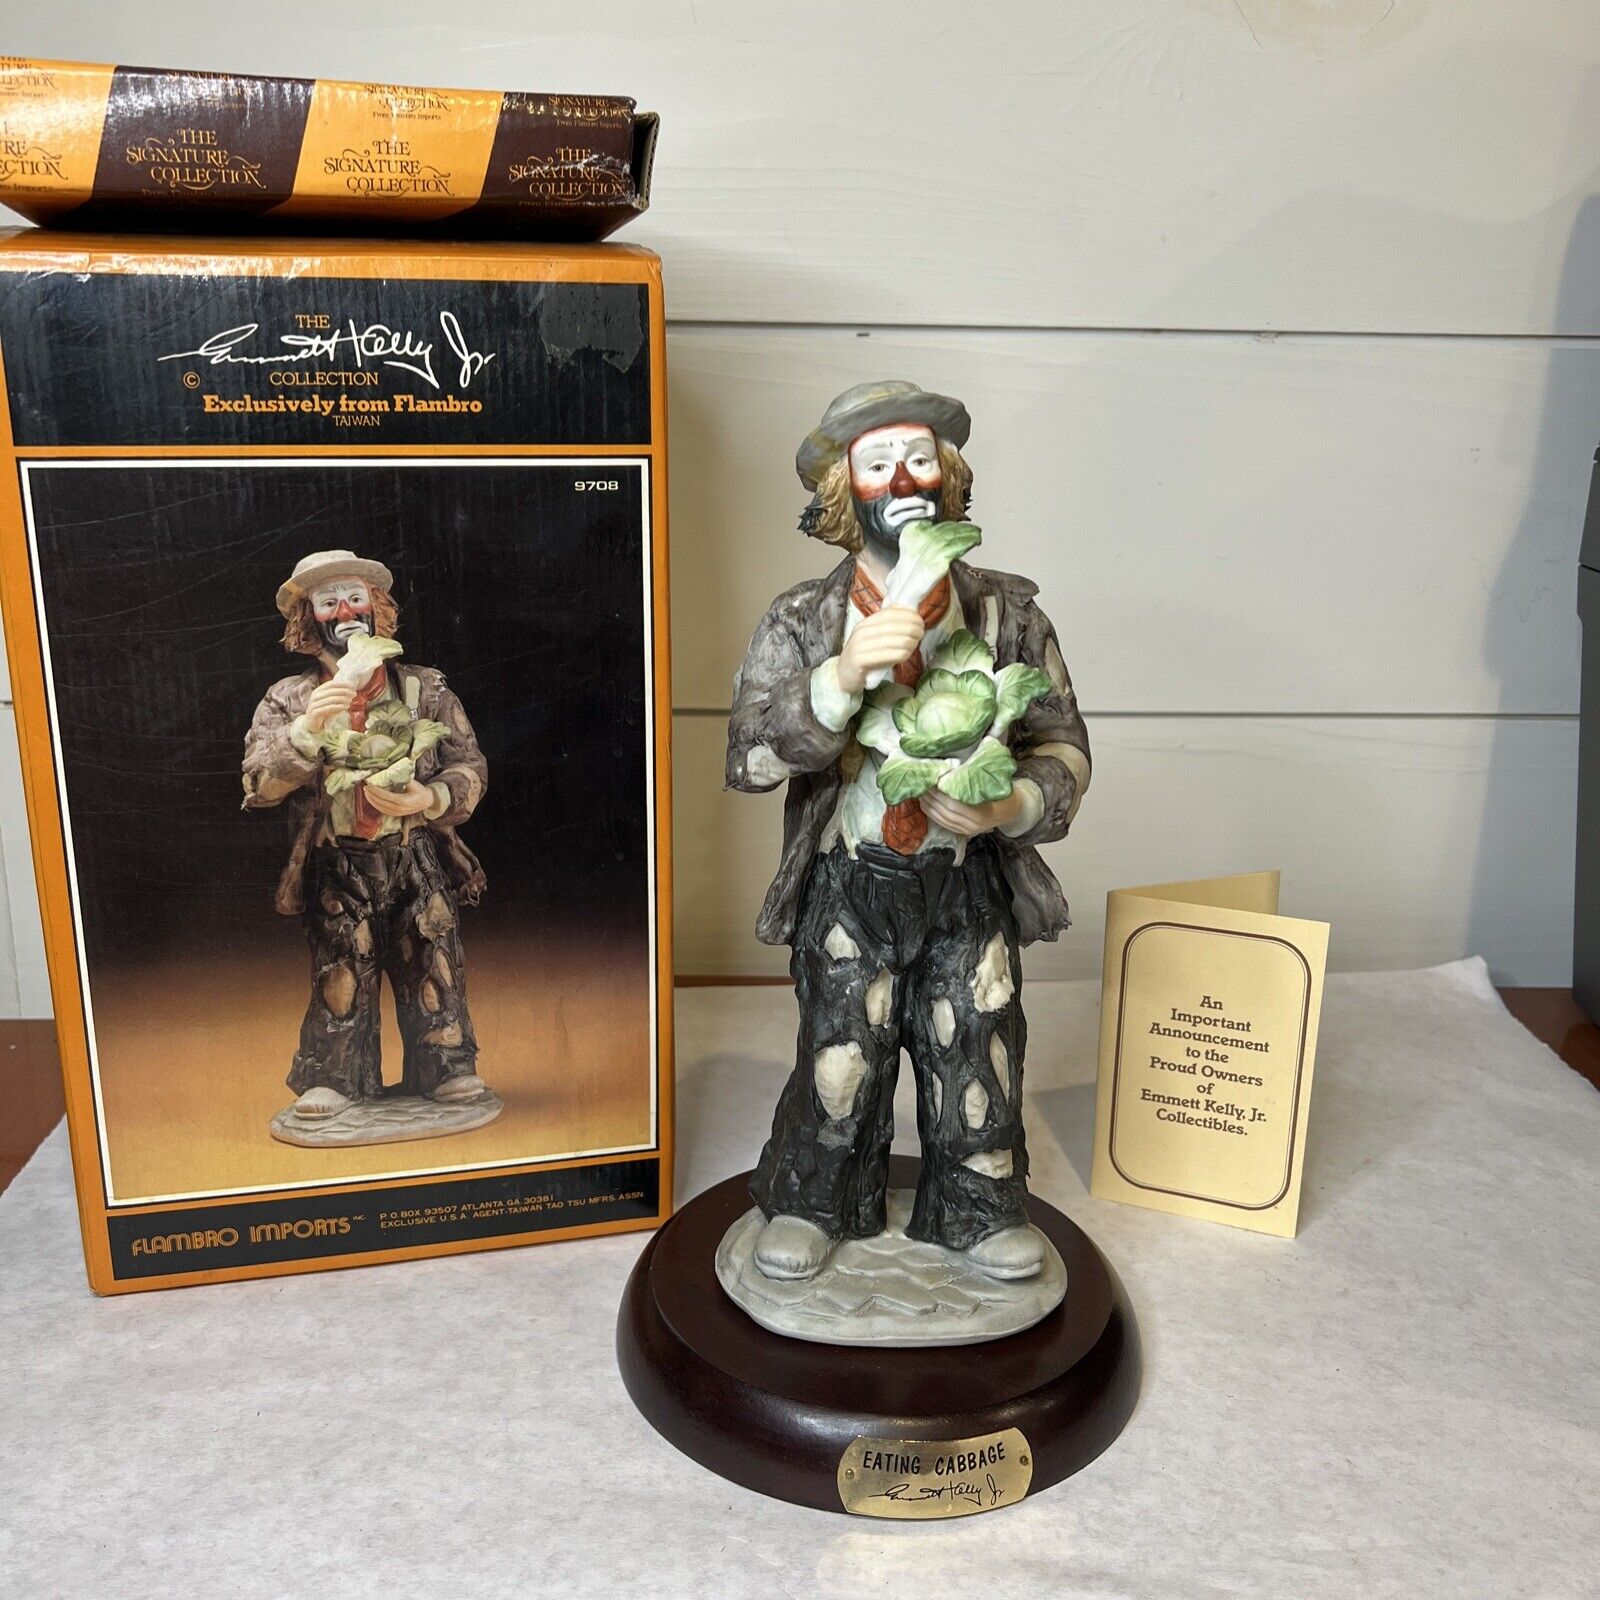 RARE Emmett Kelly JR.  figurine. “eating Cabbage” #9708 with wooden base LE 402